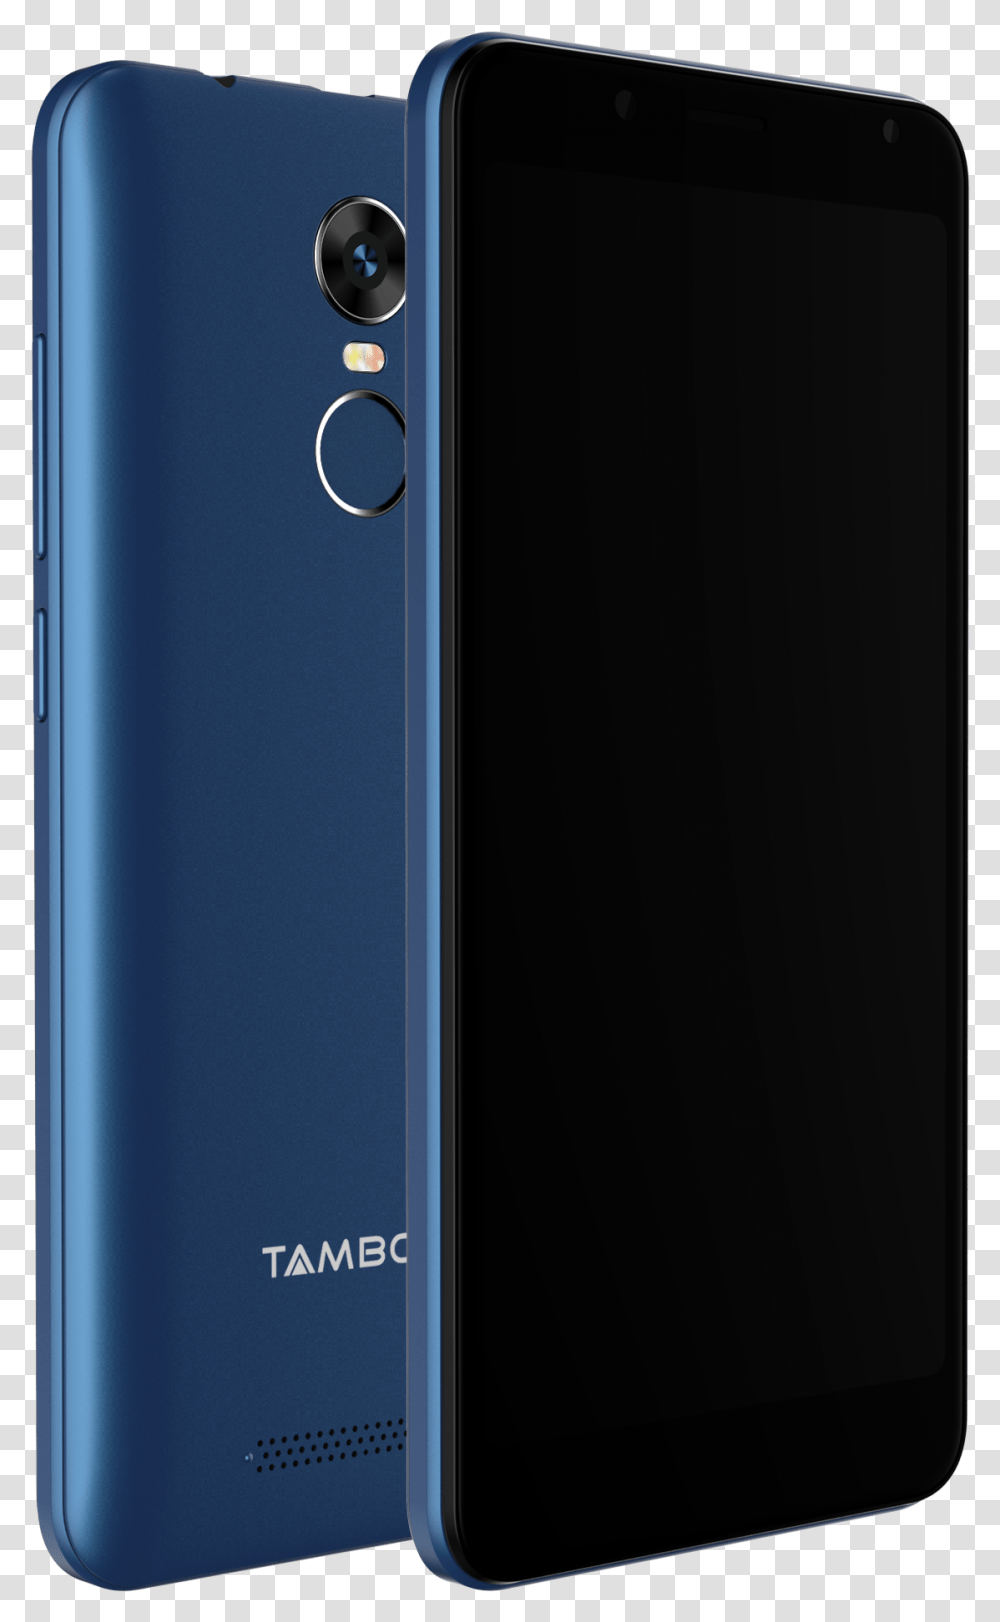 Tambo Mobiles Debuts In India With Its Superphones Smartphone, Mobile Phone, Electronics, Cell Phone, Iphone Transparent Png